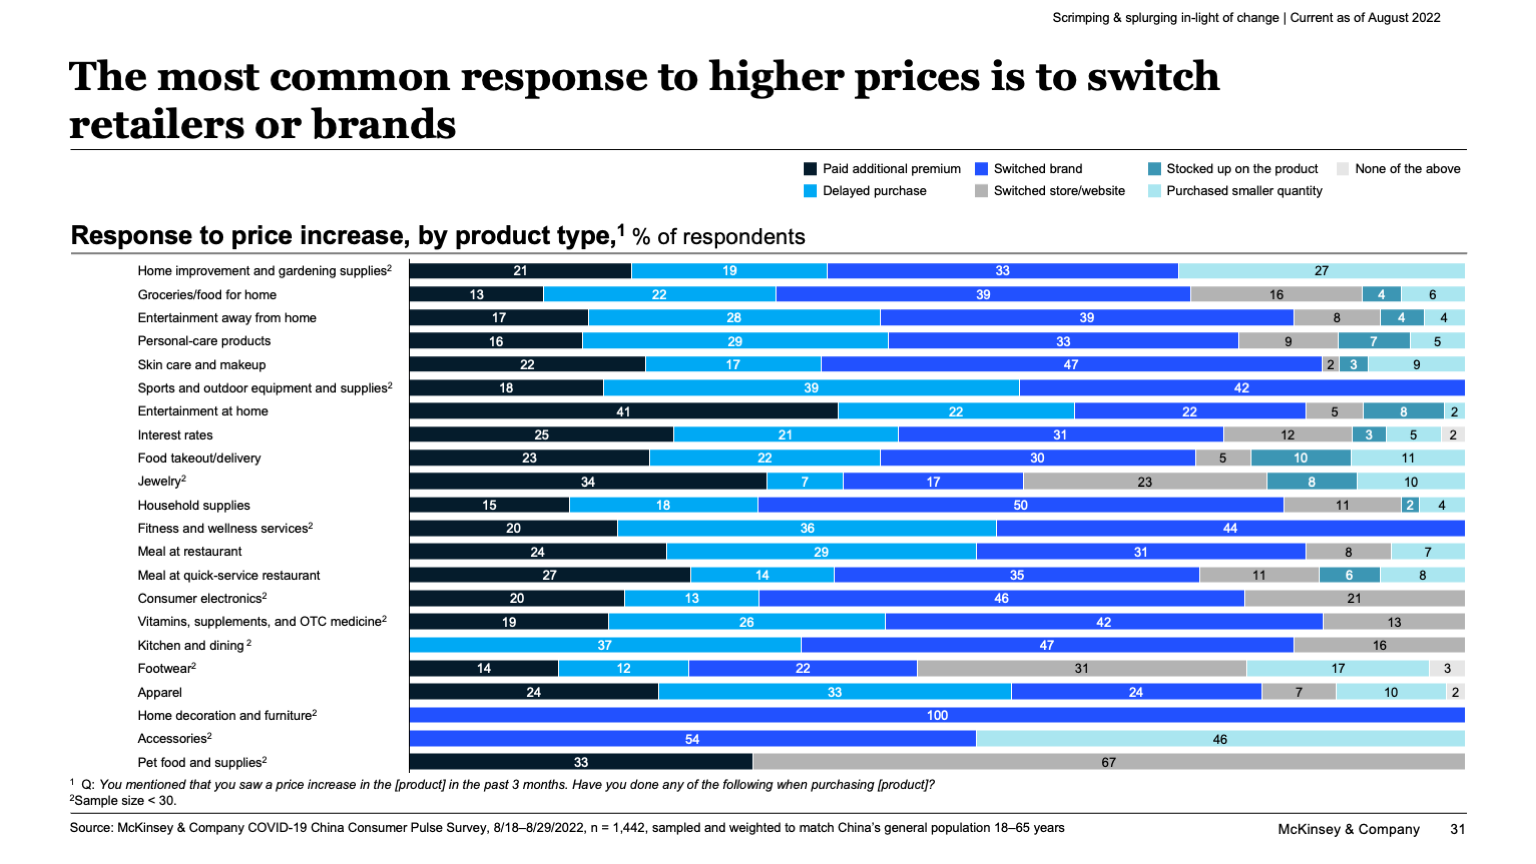 The most common response to higher prices is to switch retailers or brands